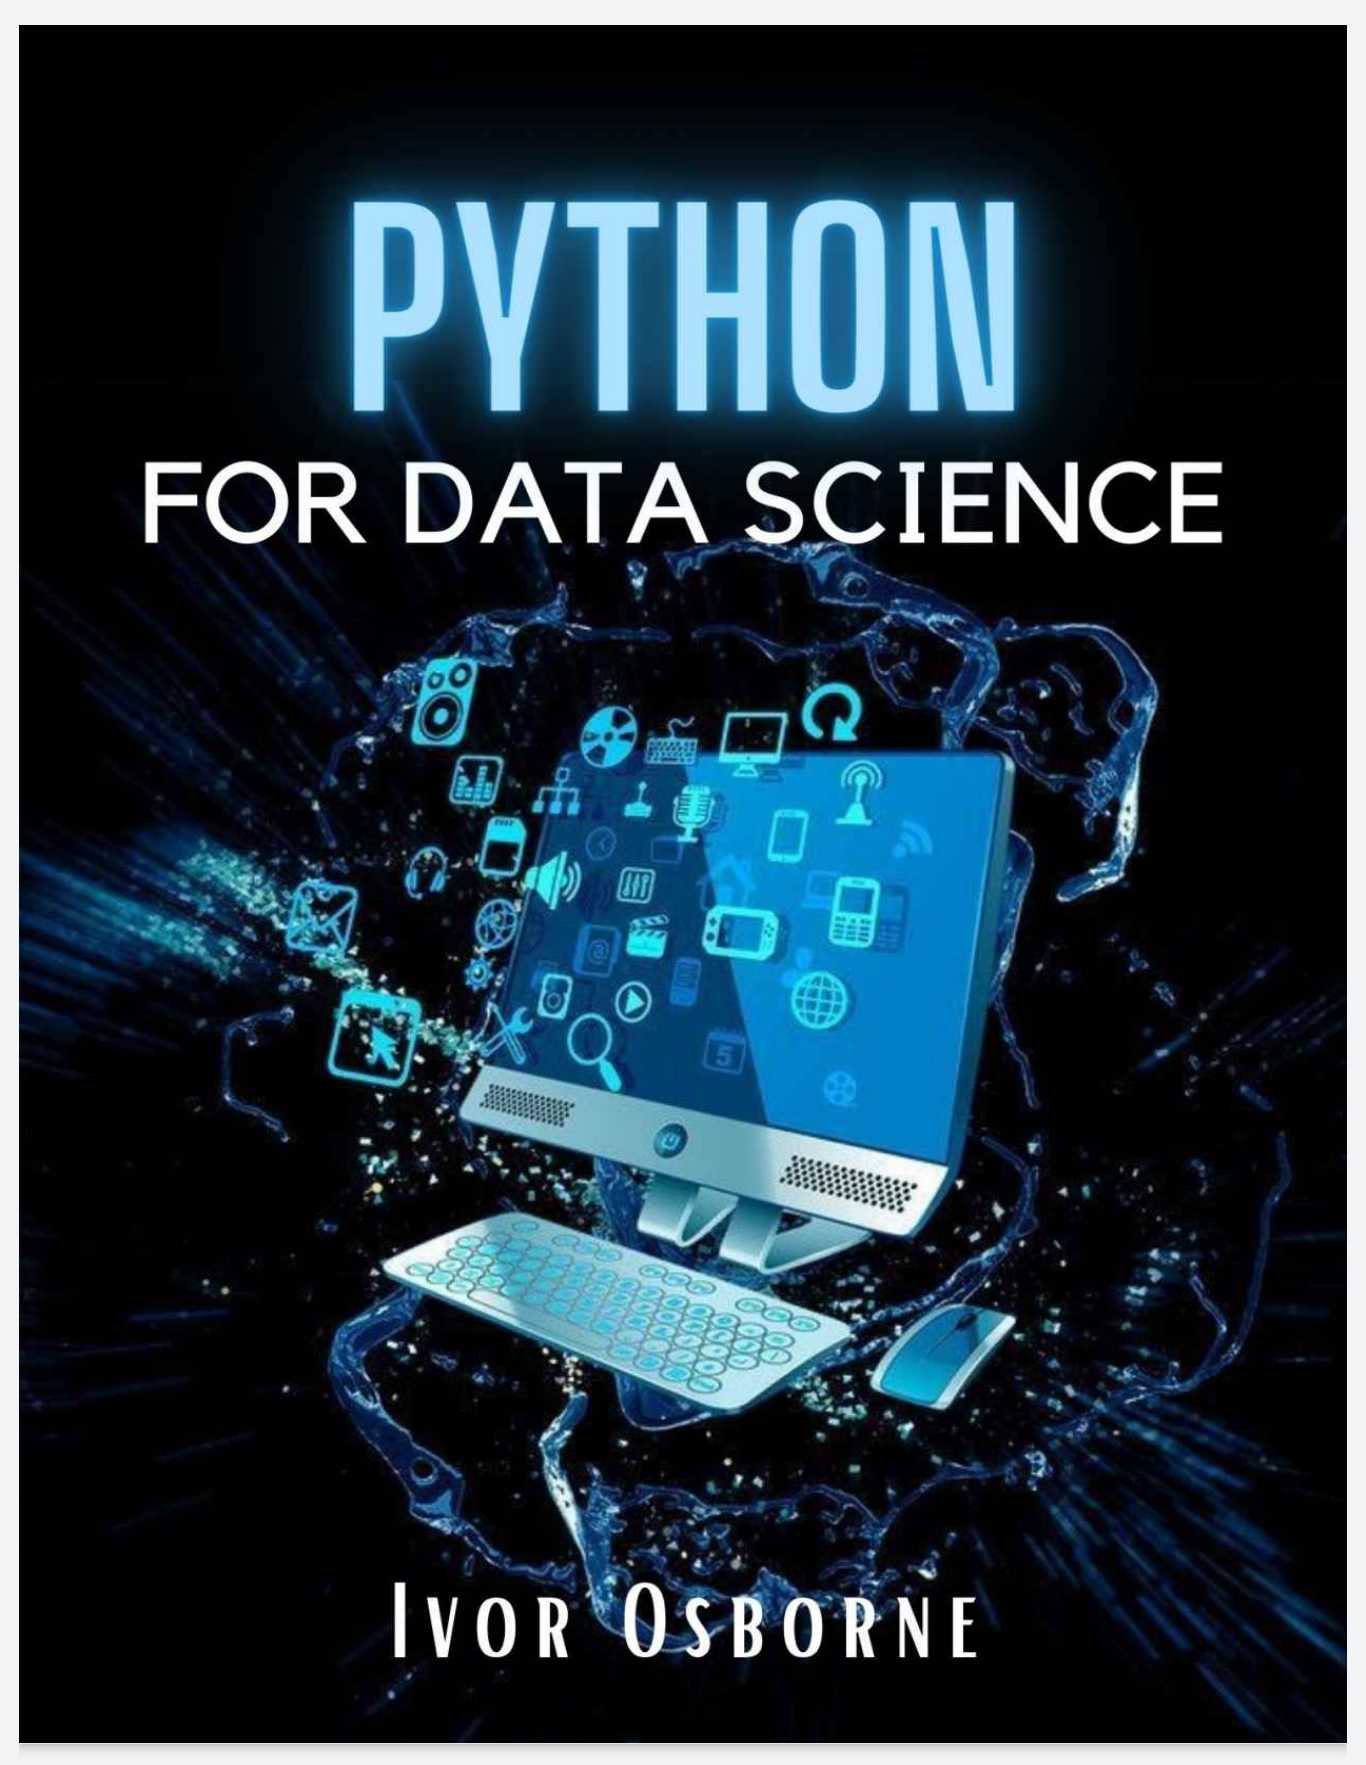 Python Data Science: The Complete Step-by-Step Python Programming Guide. Learn How to Master Big Data Analysis and Machine Learning